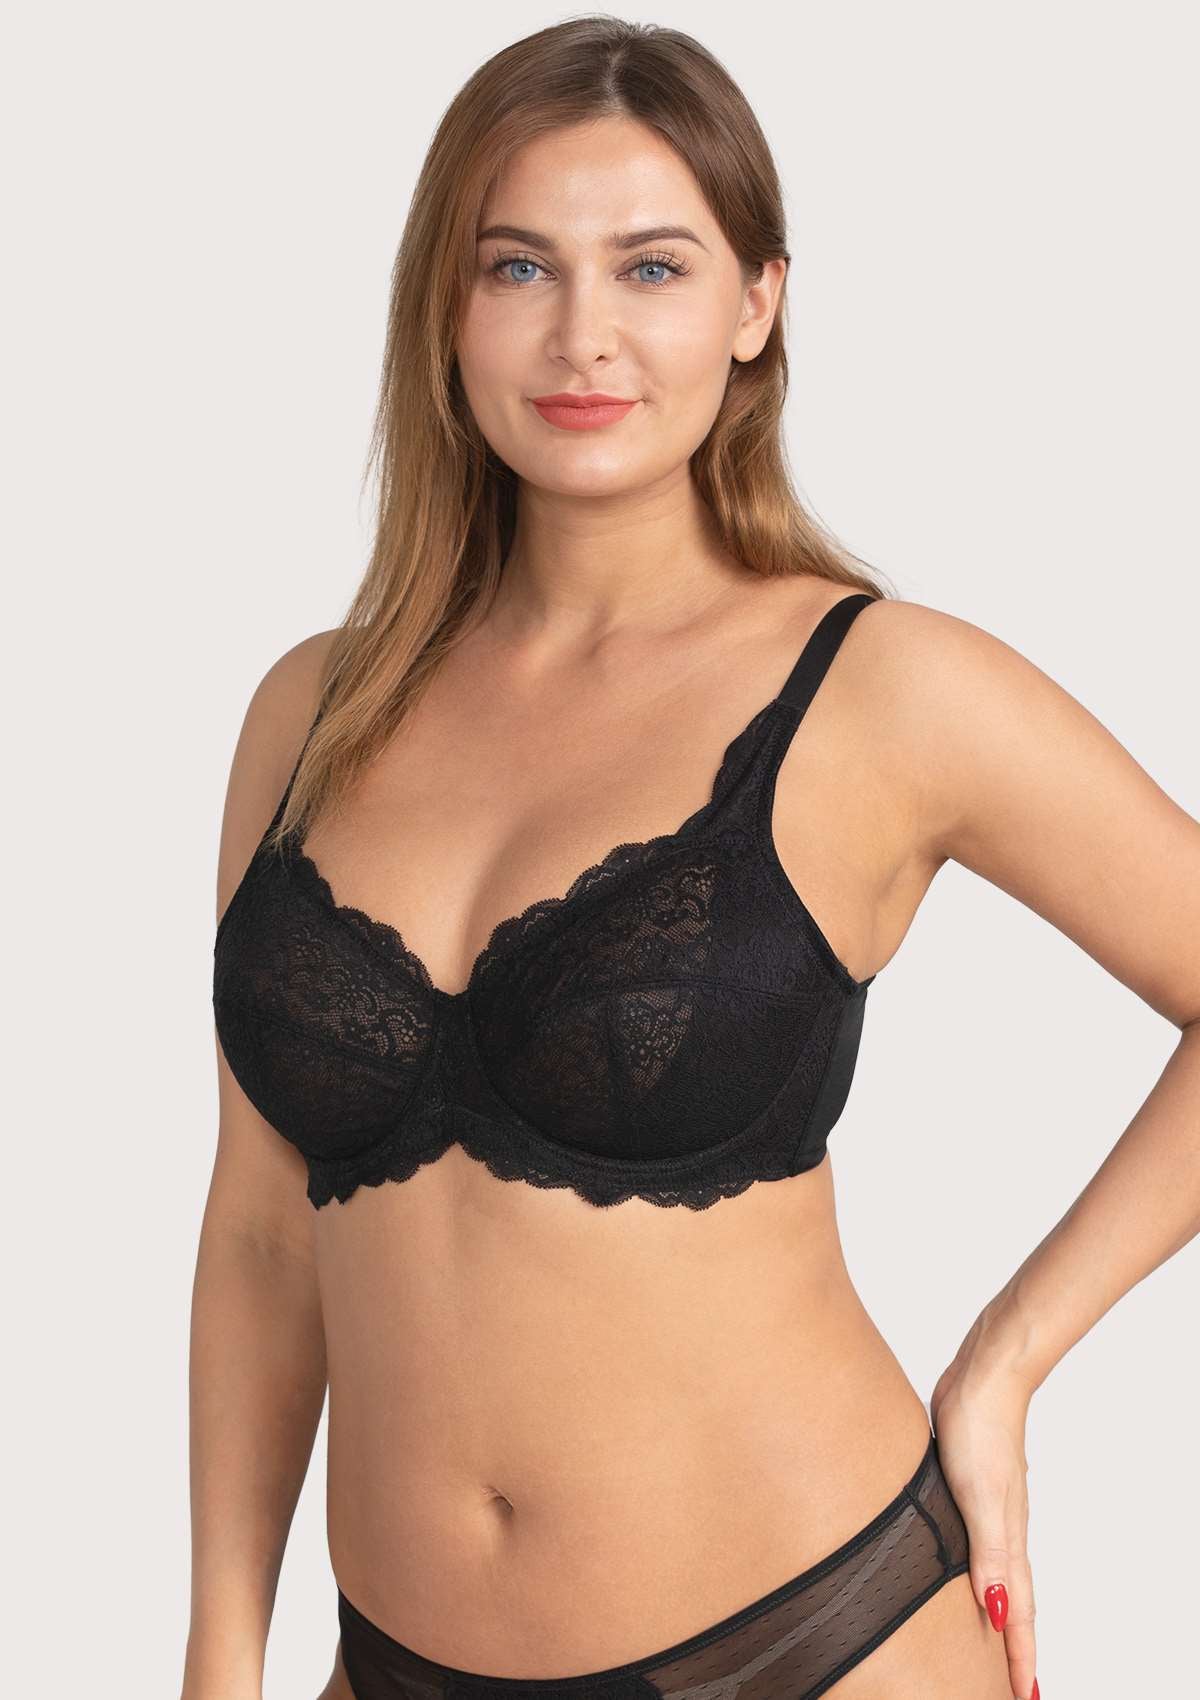 HSIA All-Over Floral Lace Unlined Bra: Minimizer Bra For Heavy Breasts - Dark Green / 44 / C